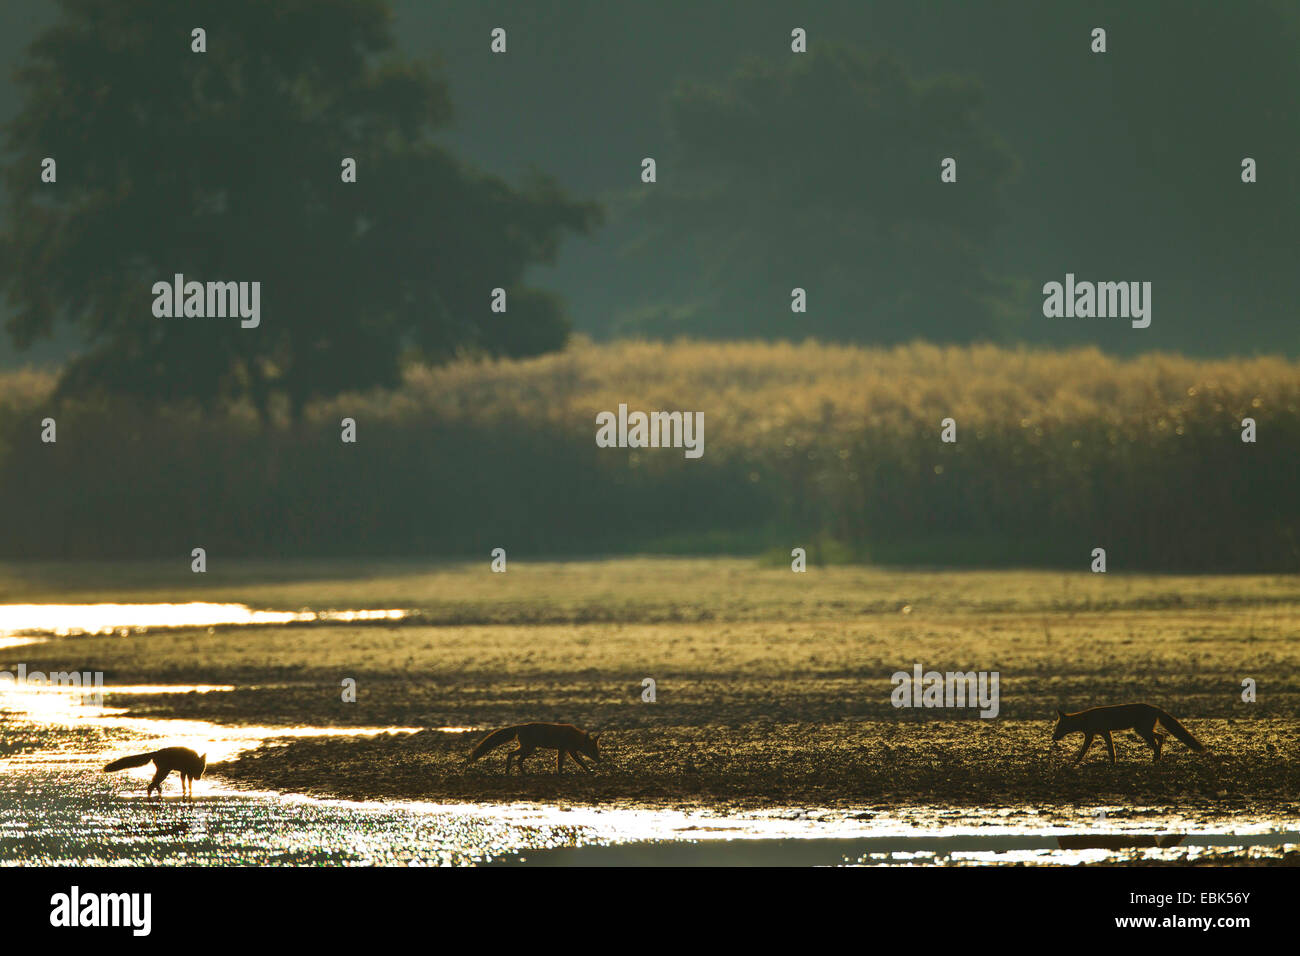 red fox (Vulpes vulpes), Red Foxes in morning light at the shore of a lake, Germany, Saxony, Oberlausitz, Upper Lausitz Heath and Pond Landscape Stock Photo